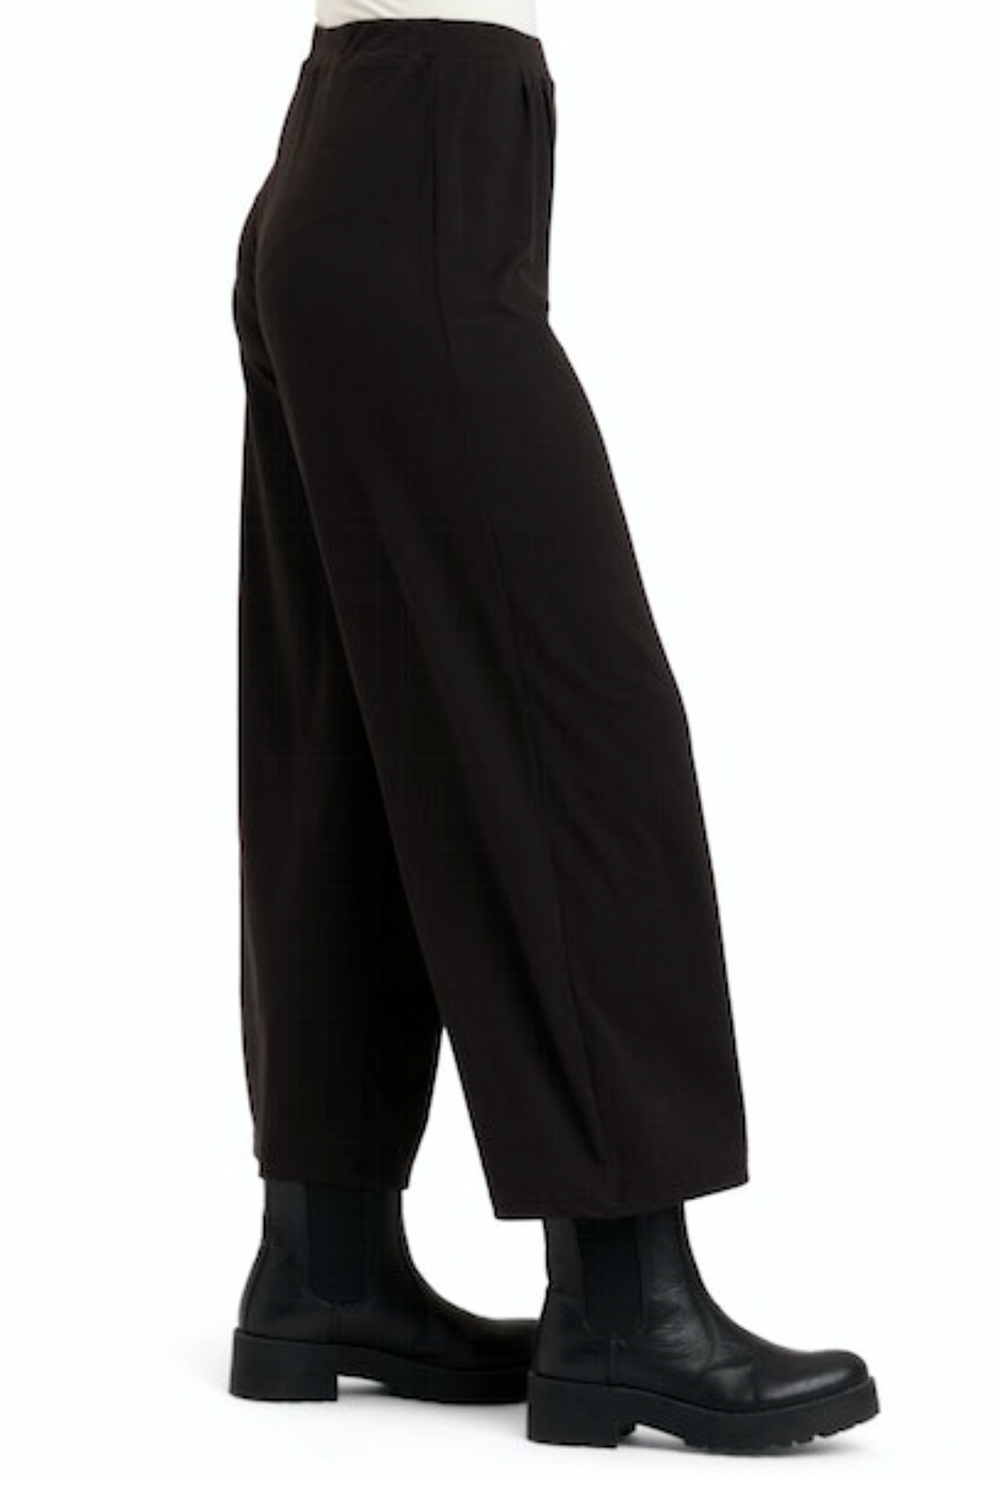 Threads 4 Thought pant, Kennedy wide leg